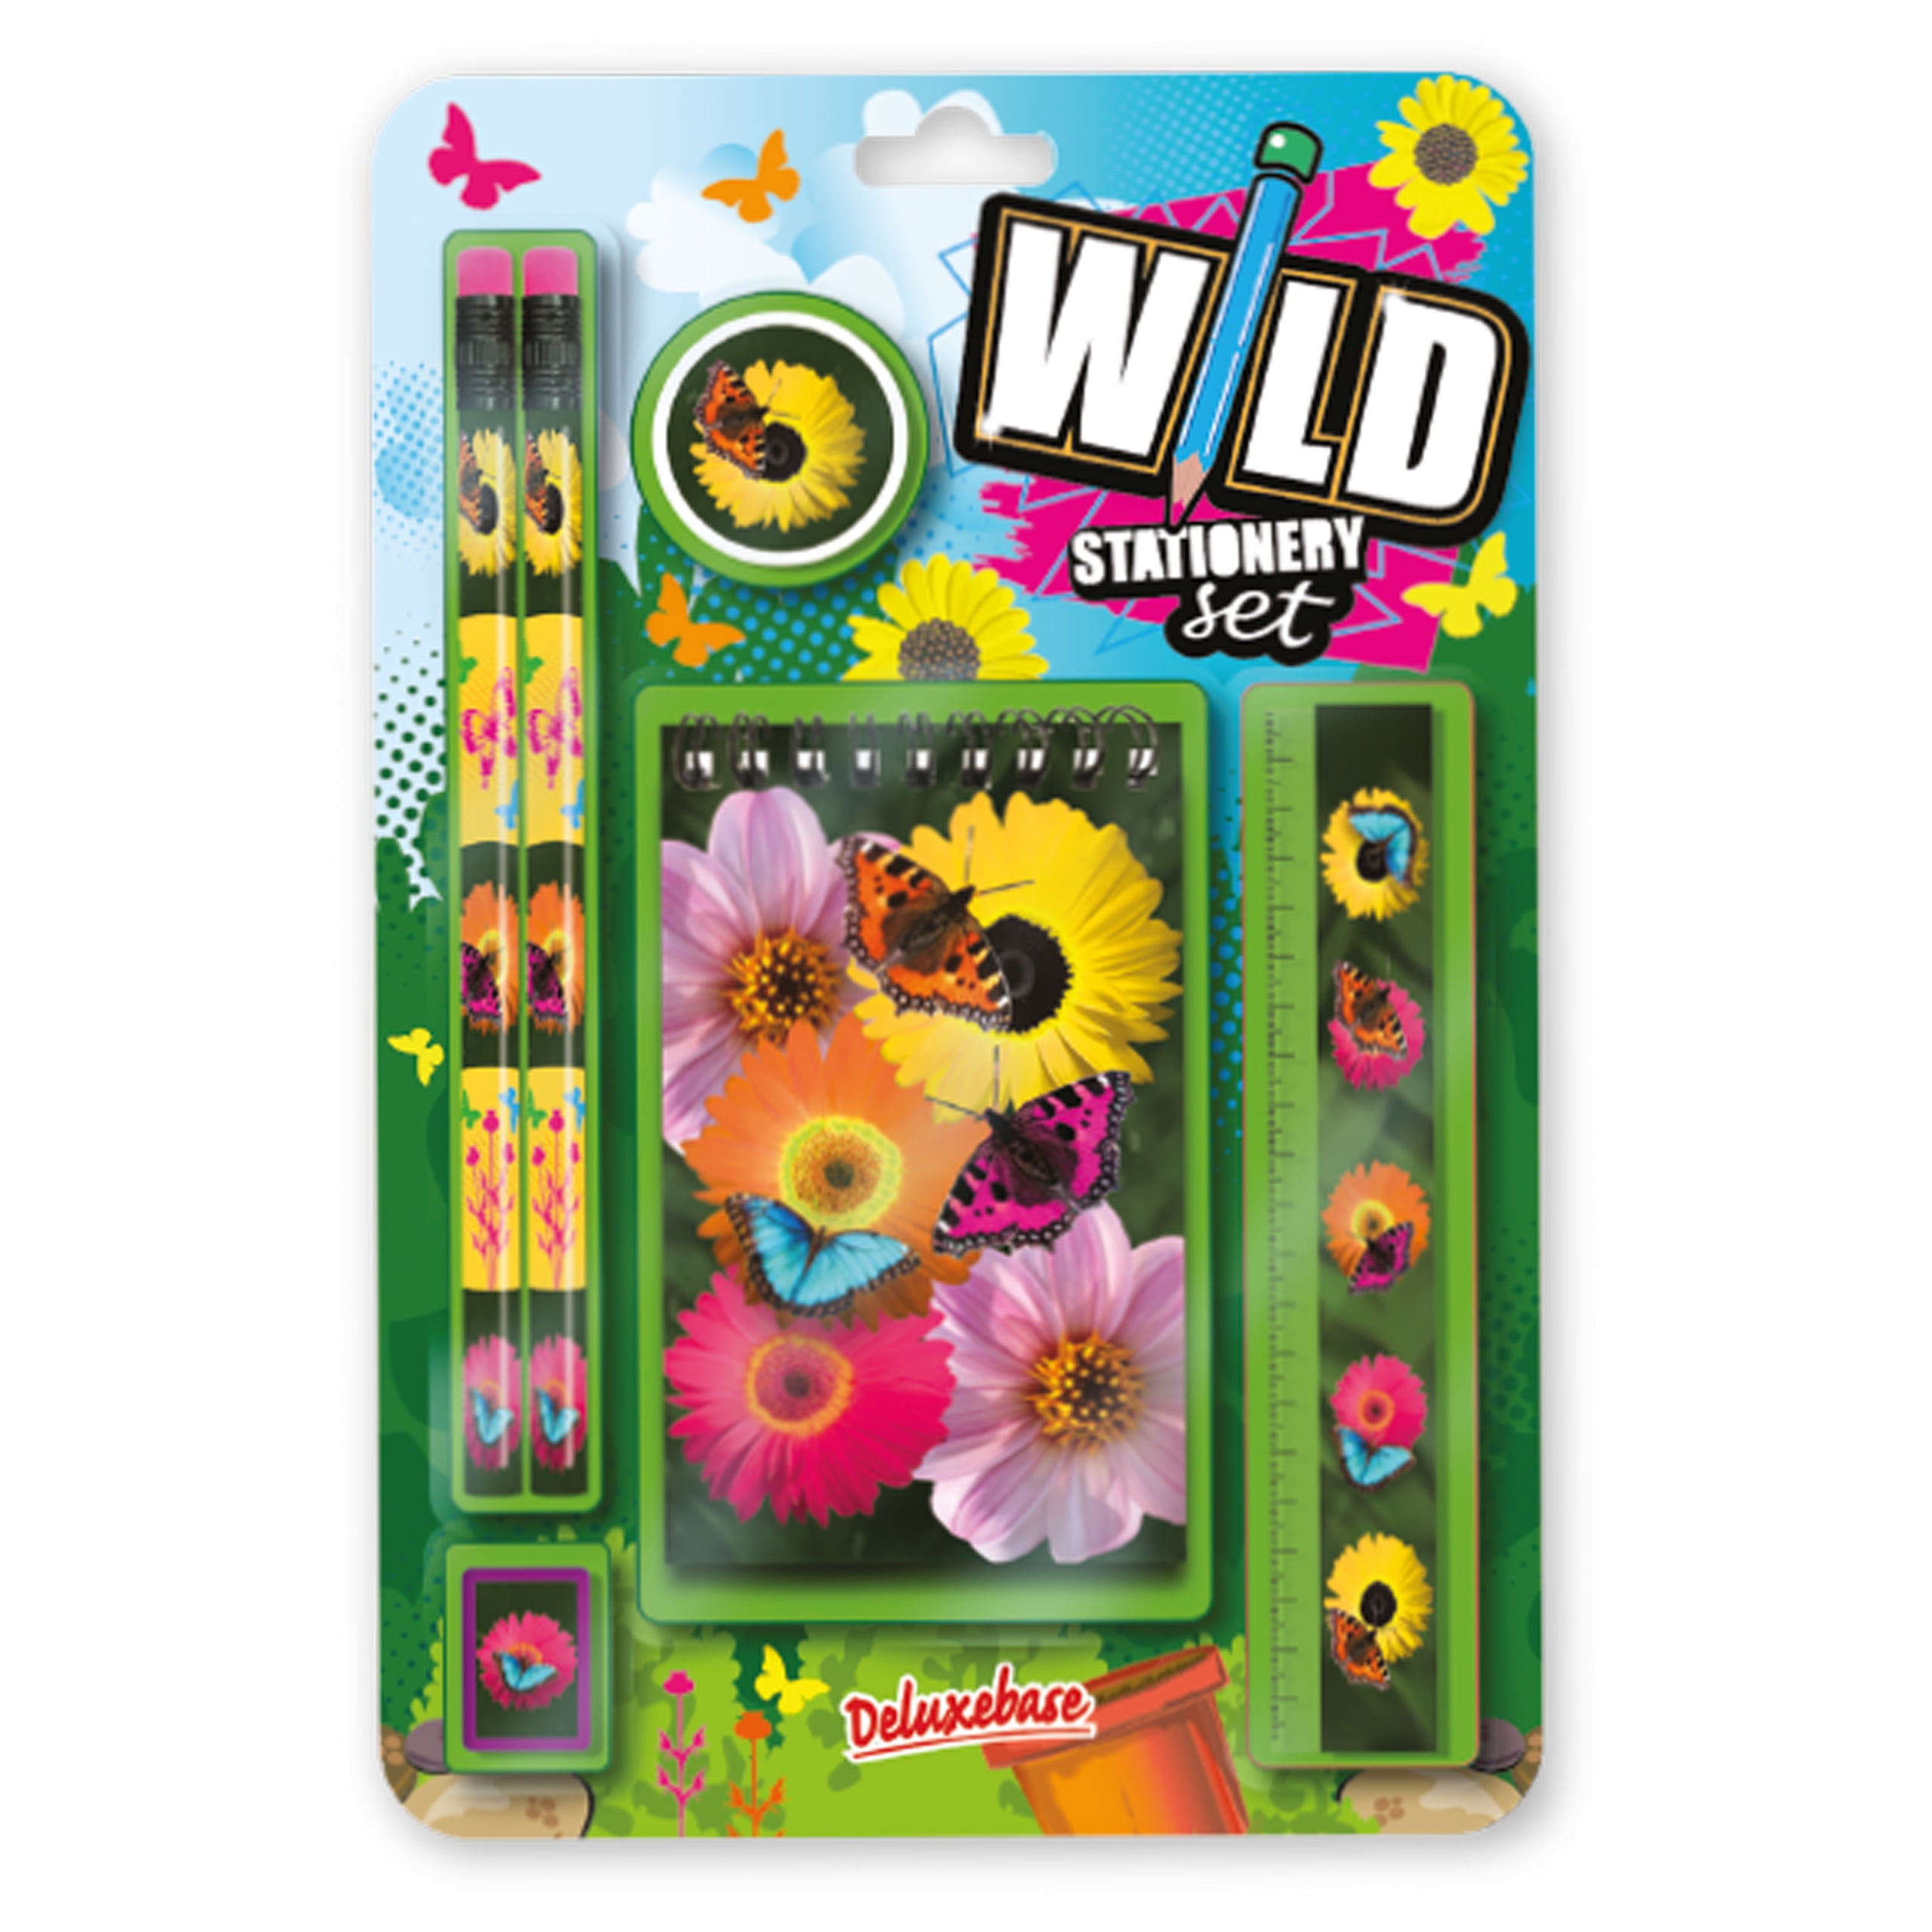 Wild Stationery Set - Butterfly School Stationary Sets from